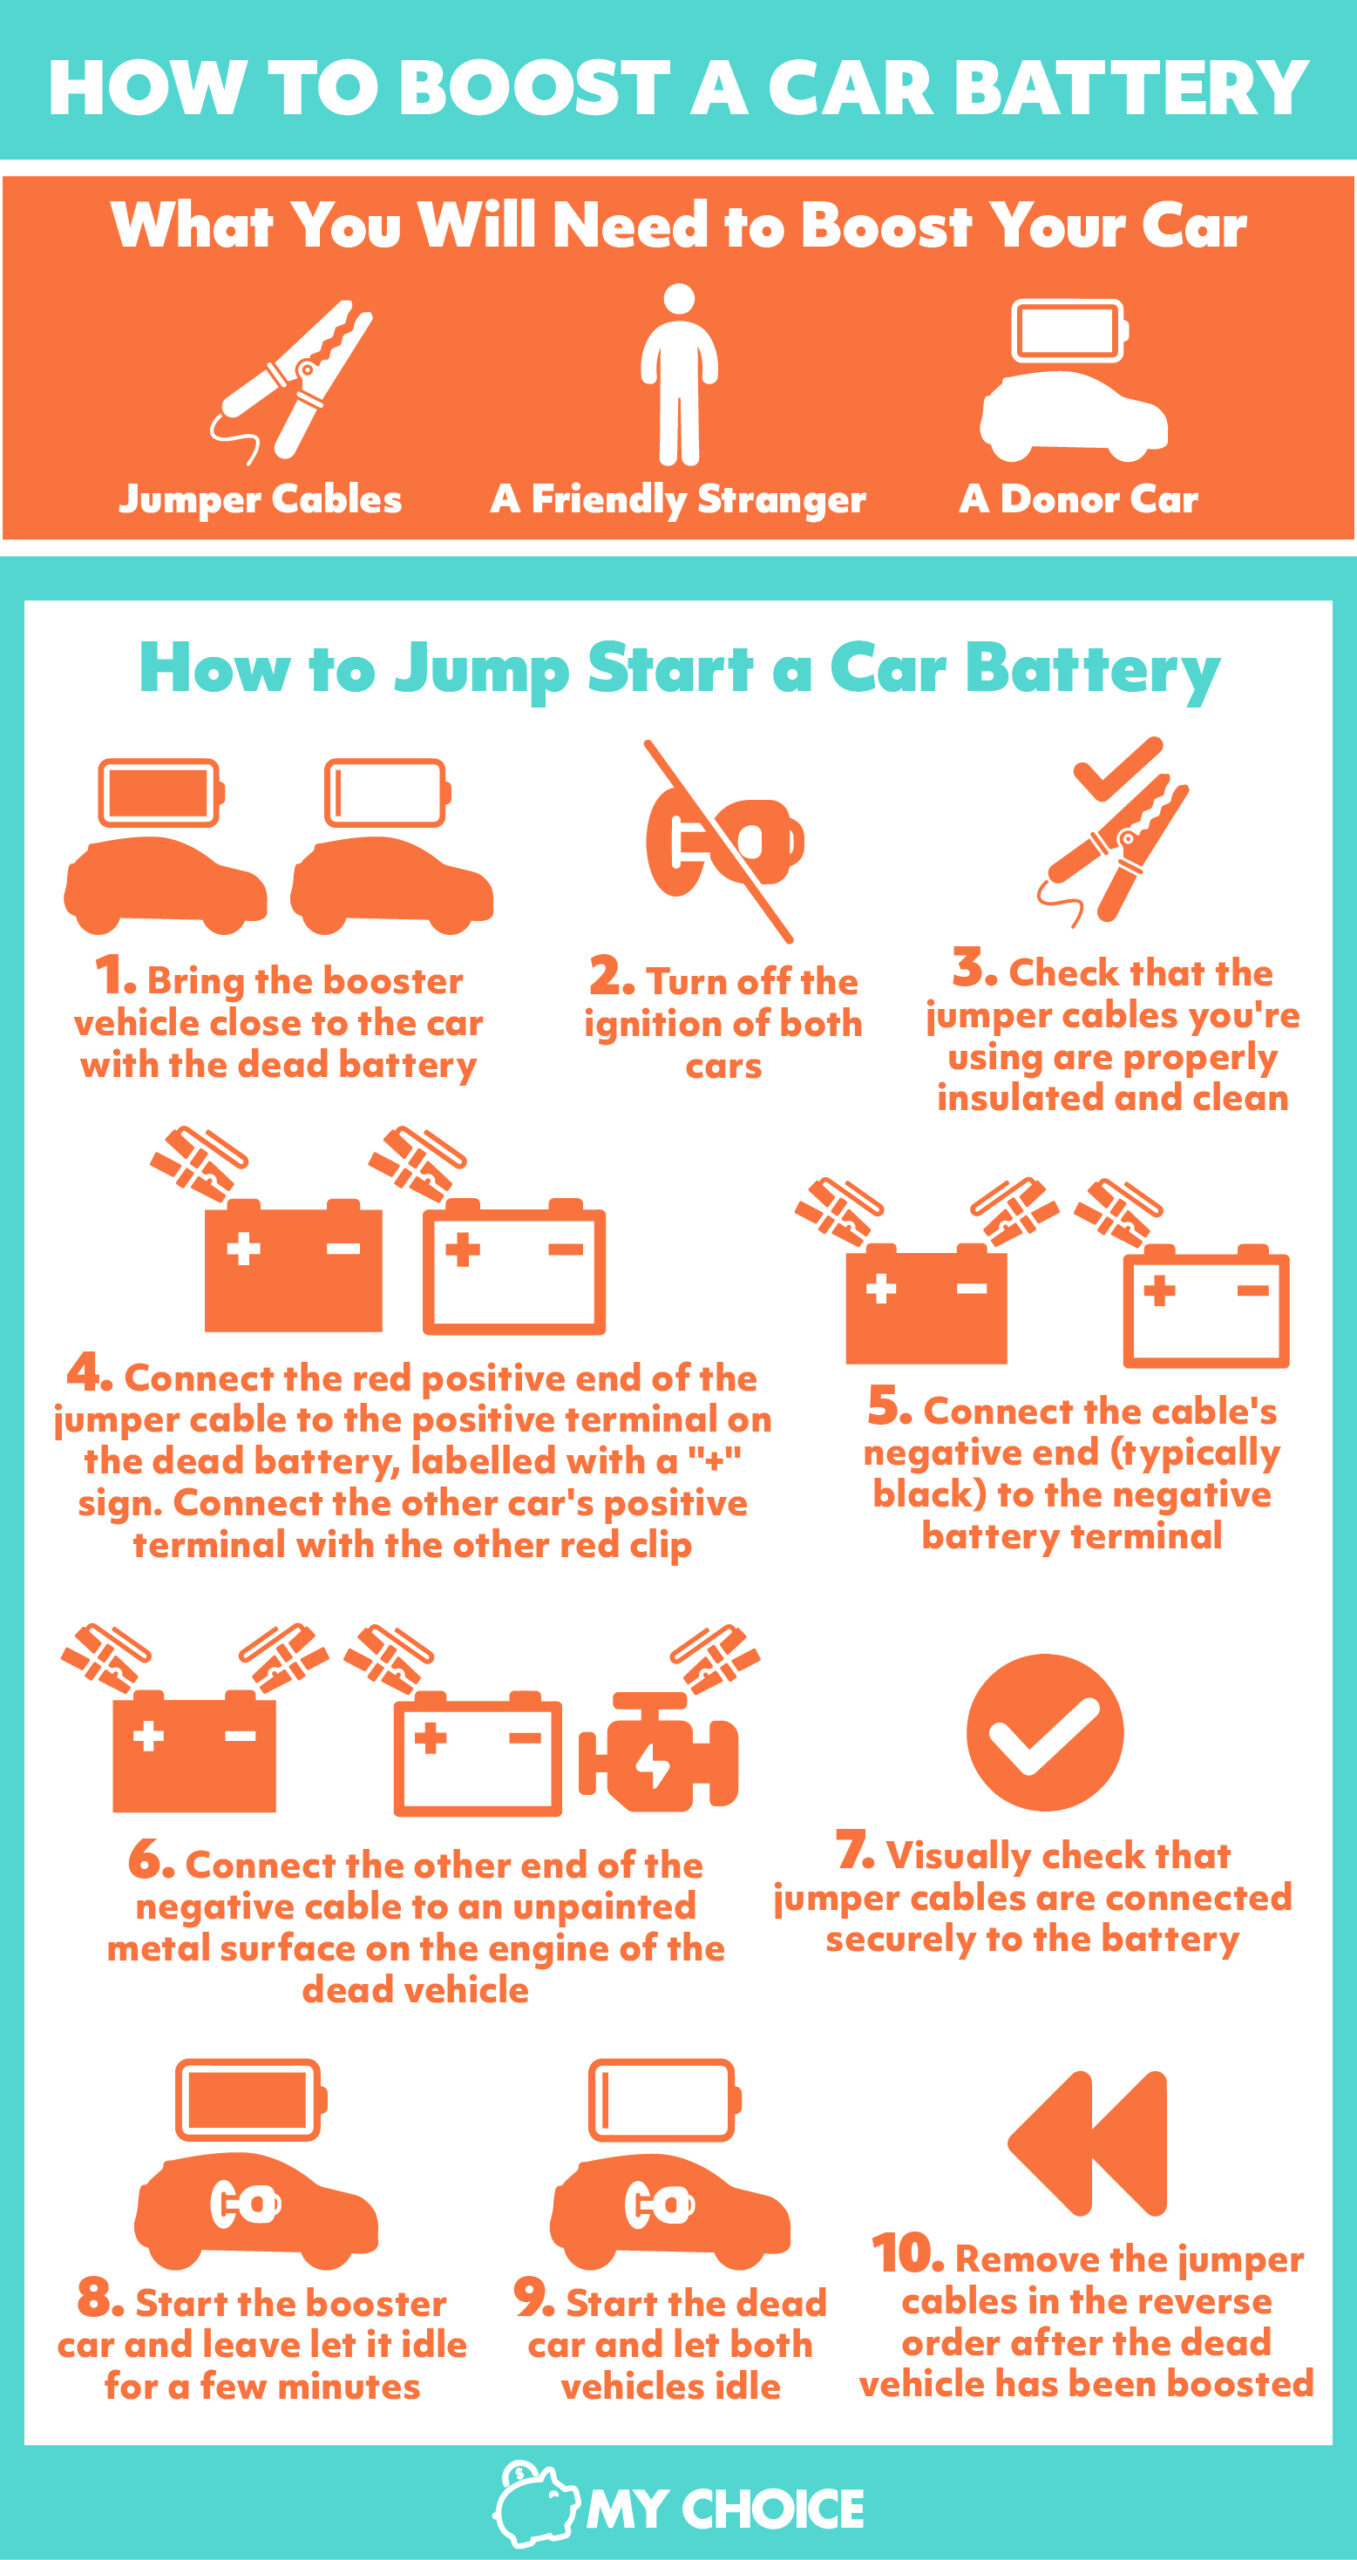 How to Boost a Car Battery